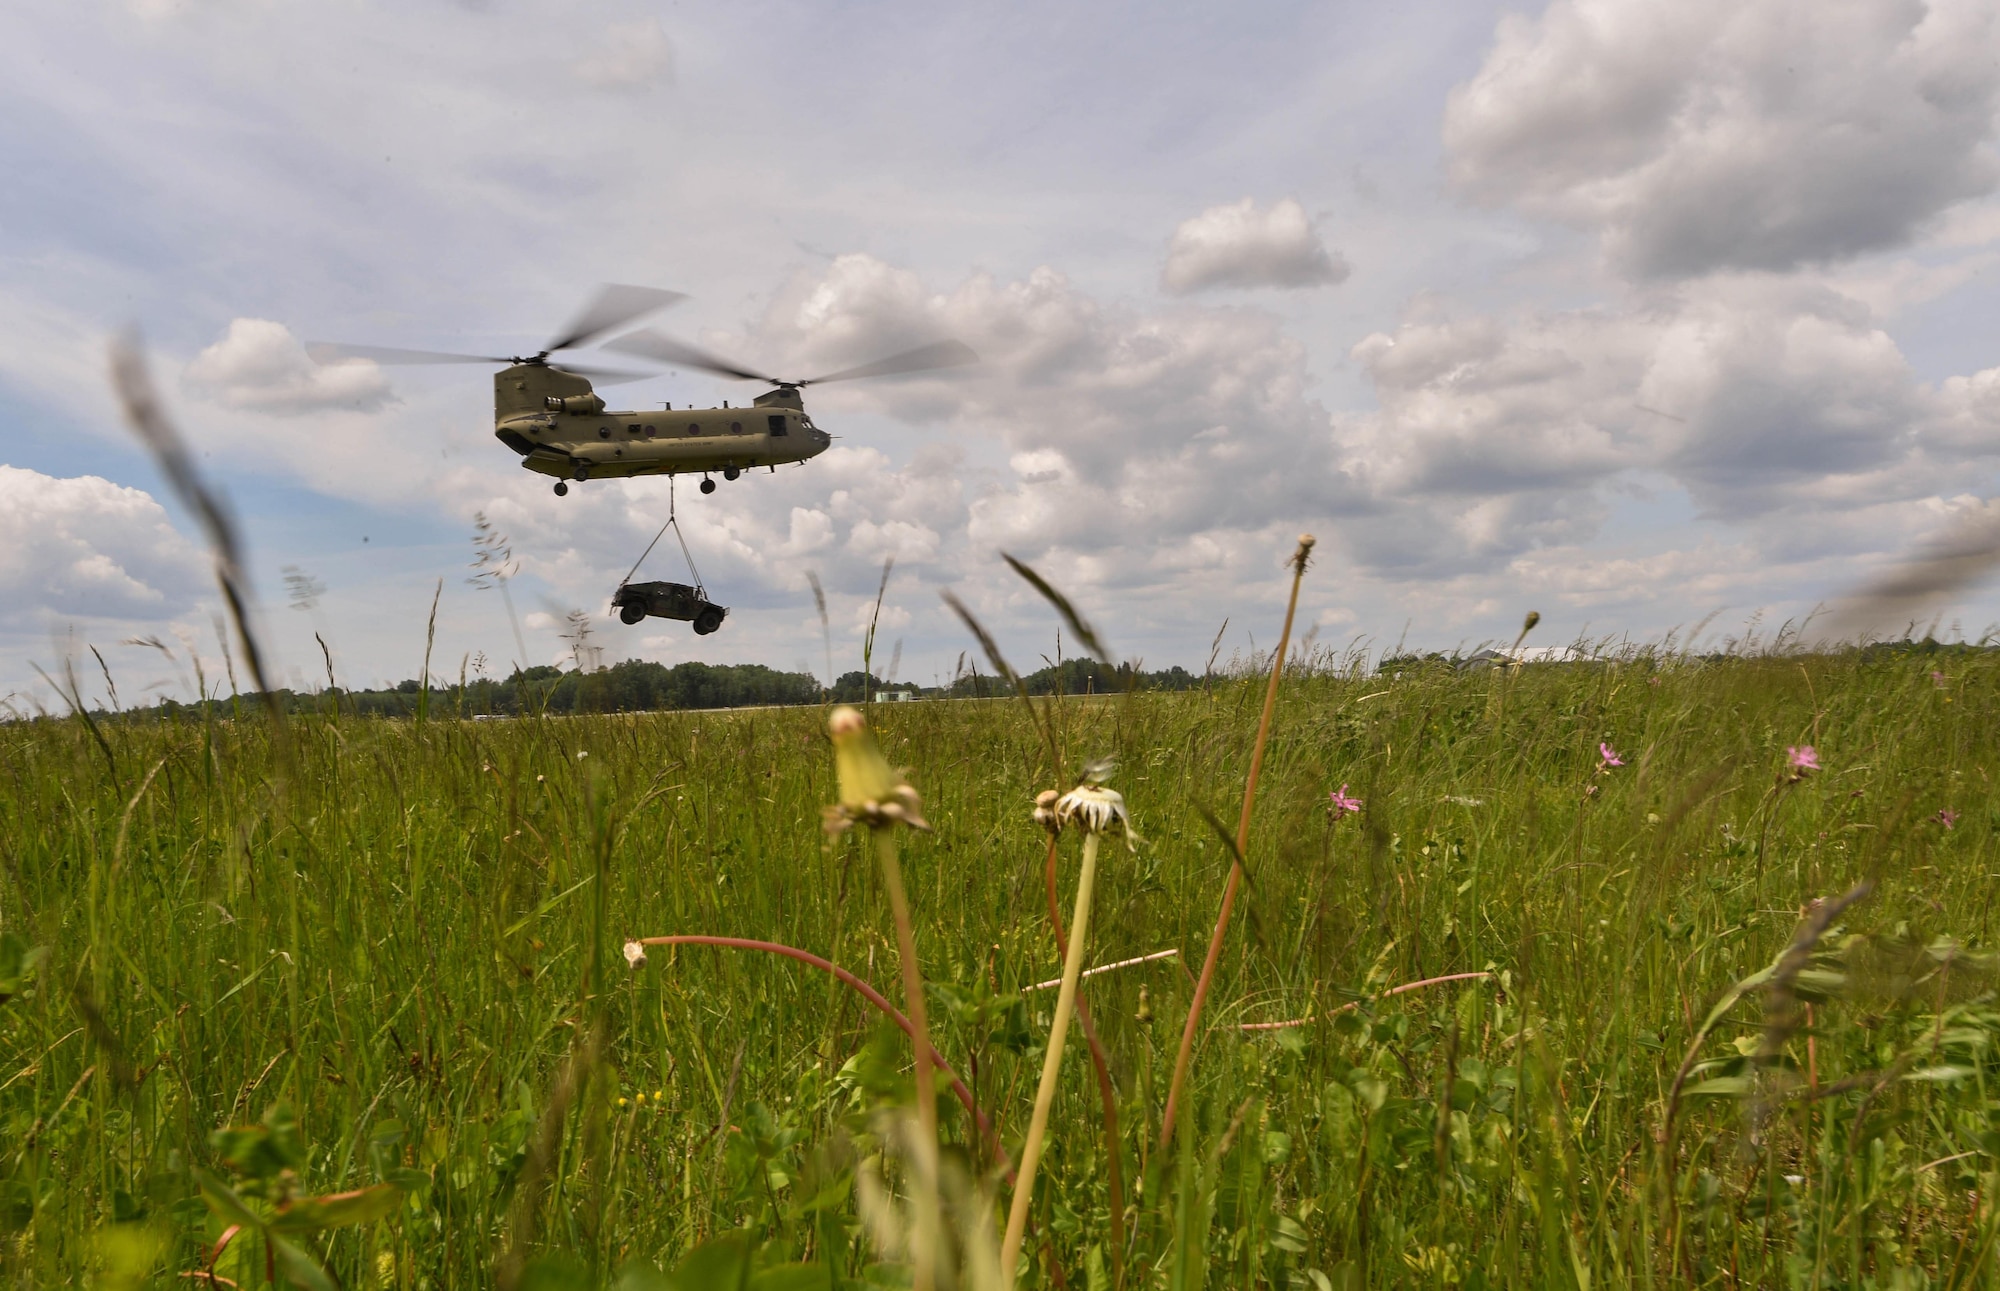 A U.S. Army CH-47 Chinook helicopter carries a high mobility multipurpose wheeled vehicle for the U.S. Air Force 435th Contingency Response Group’s sling load operation during exercise Saber Strike 17 at Lielvarde Air Base, Latvia, June 10, 2017. The 435th CRG Airmen worked alongside the U.S. Army and NATO military members throughout the exercise. Saber Strike 17 continues to increase participating nations’ capacity to conduct a full spectrum of military operations.  (U.S Air Force photo by Senior Airman Tryphena Mayhugh)